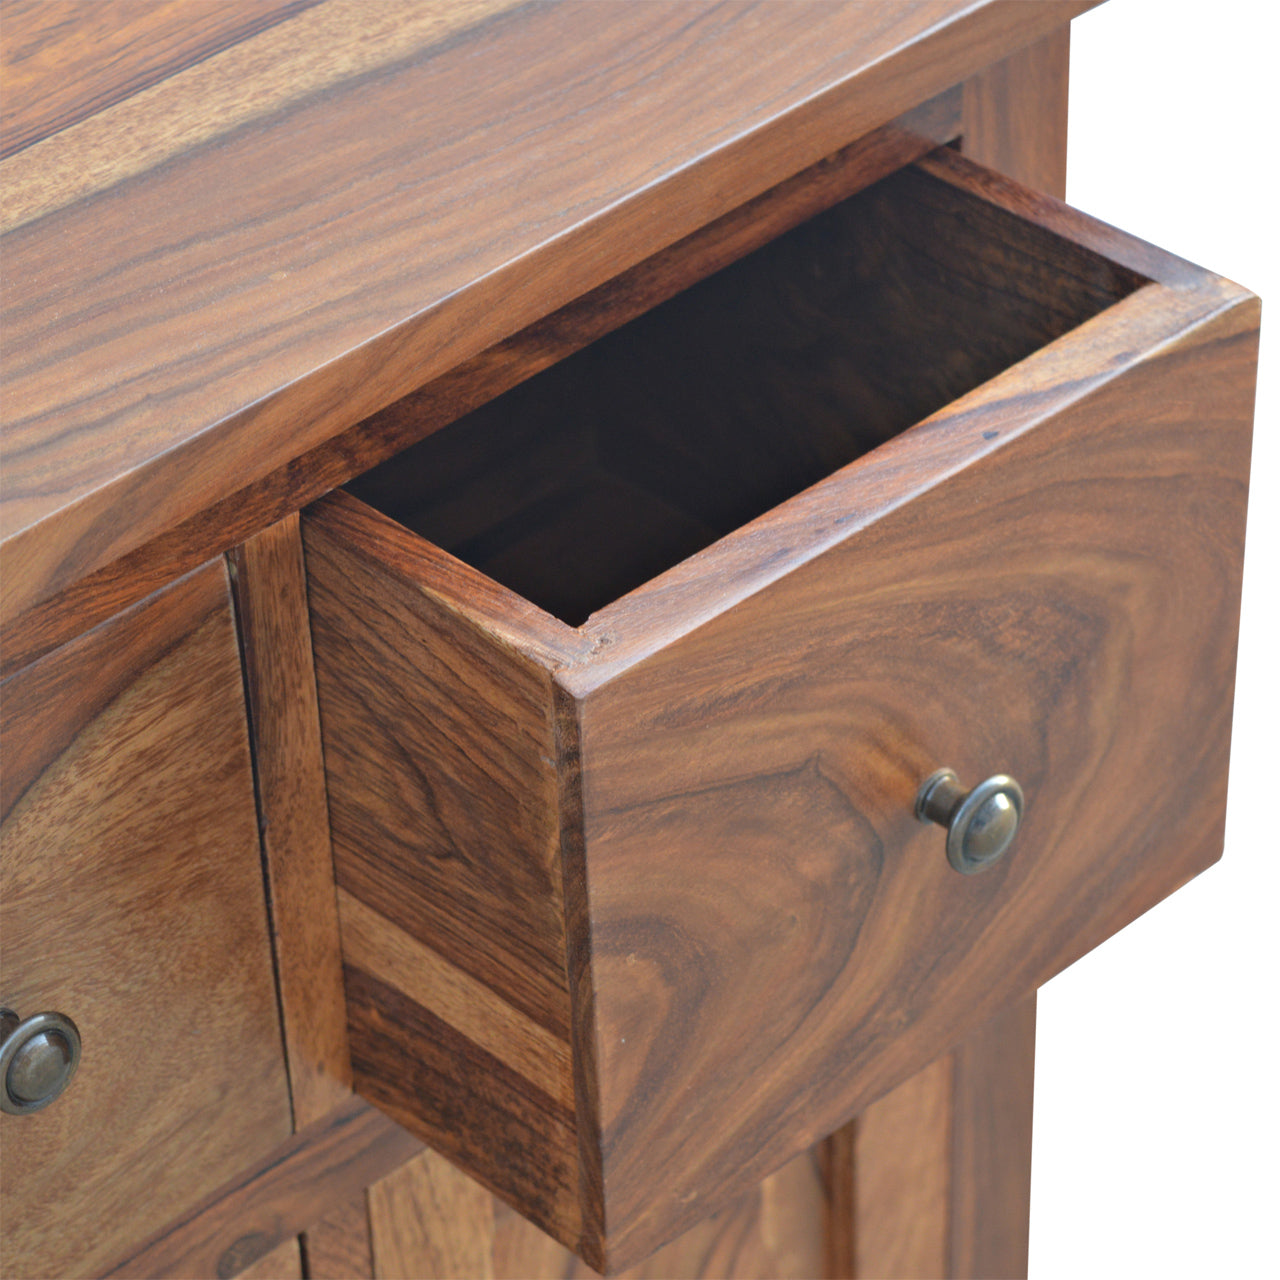 Sheesham Wood Cabinet with 4 Drawers and 1 Door